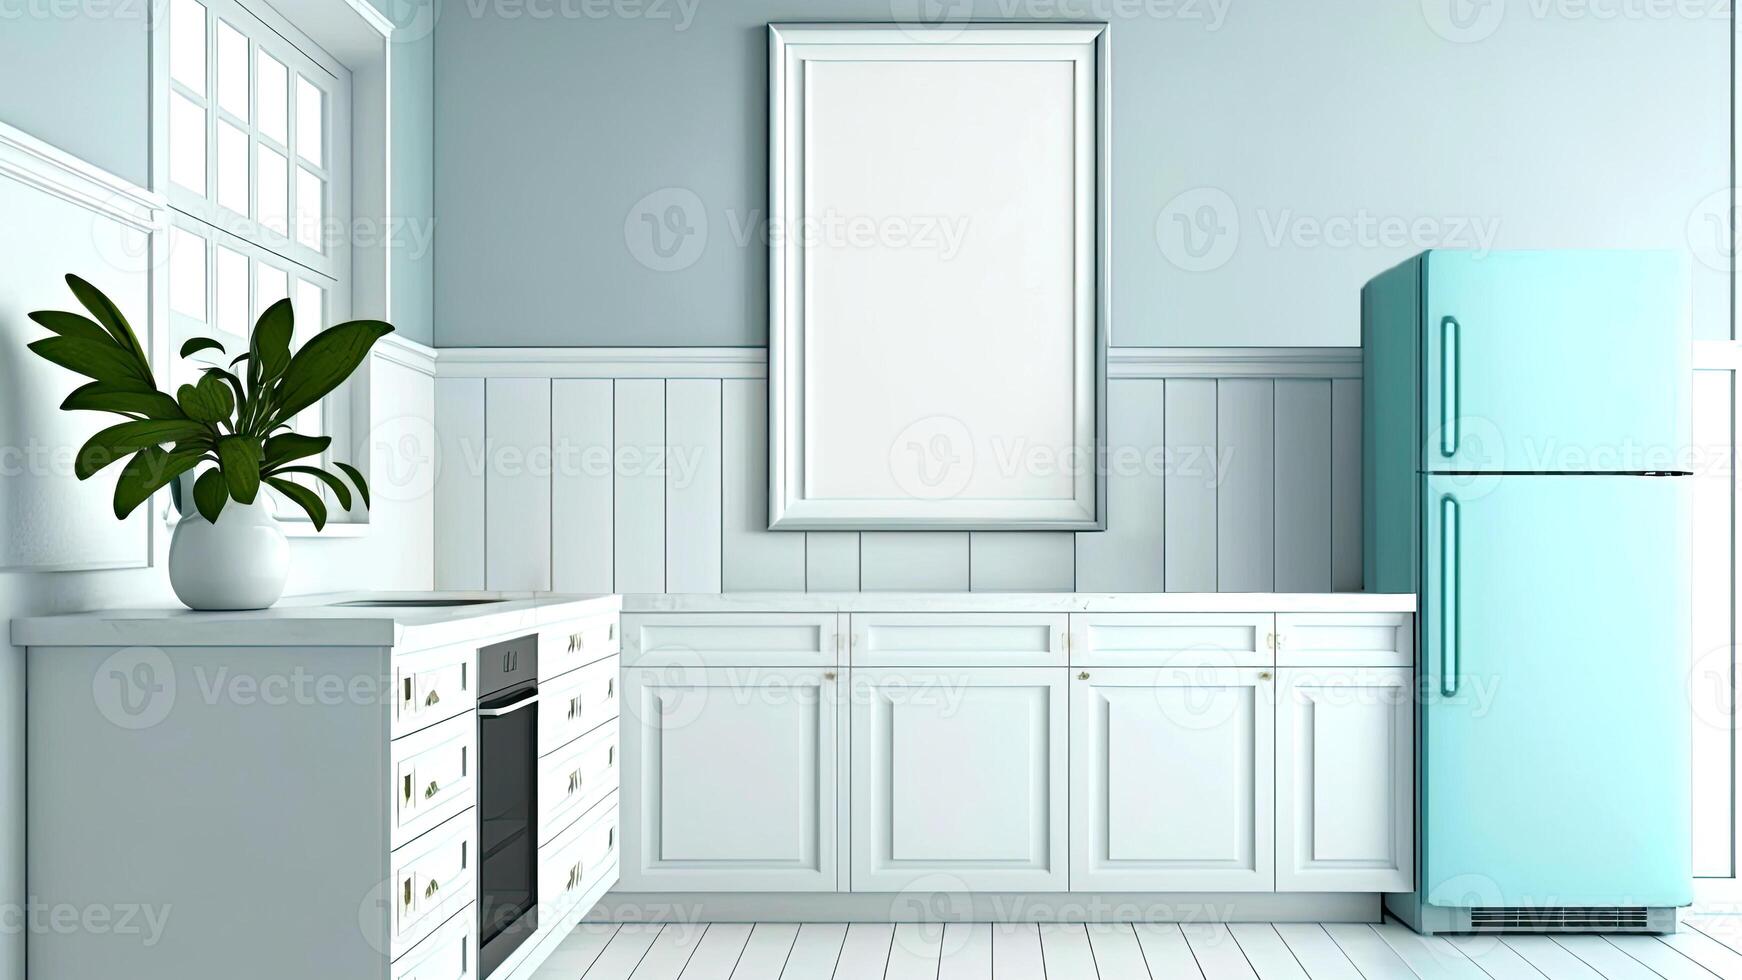 Luxurious, modern contemporary pastel blue wall kitchen, minimalistic design with blank photo frames. Digital Illustration.